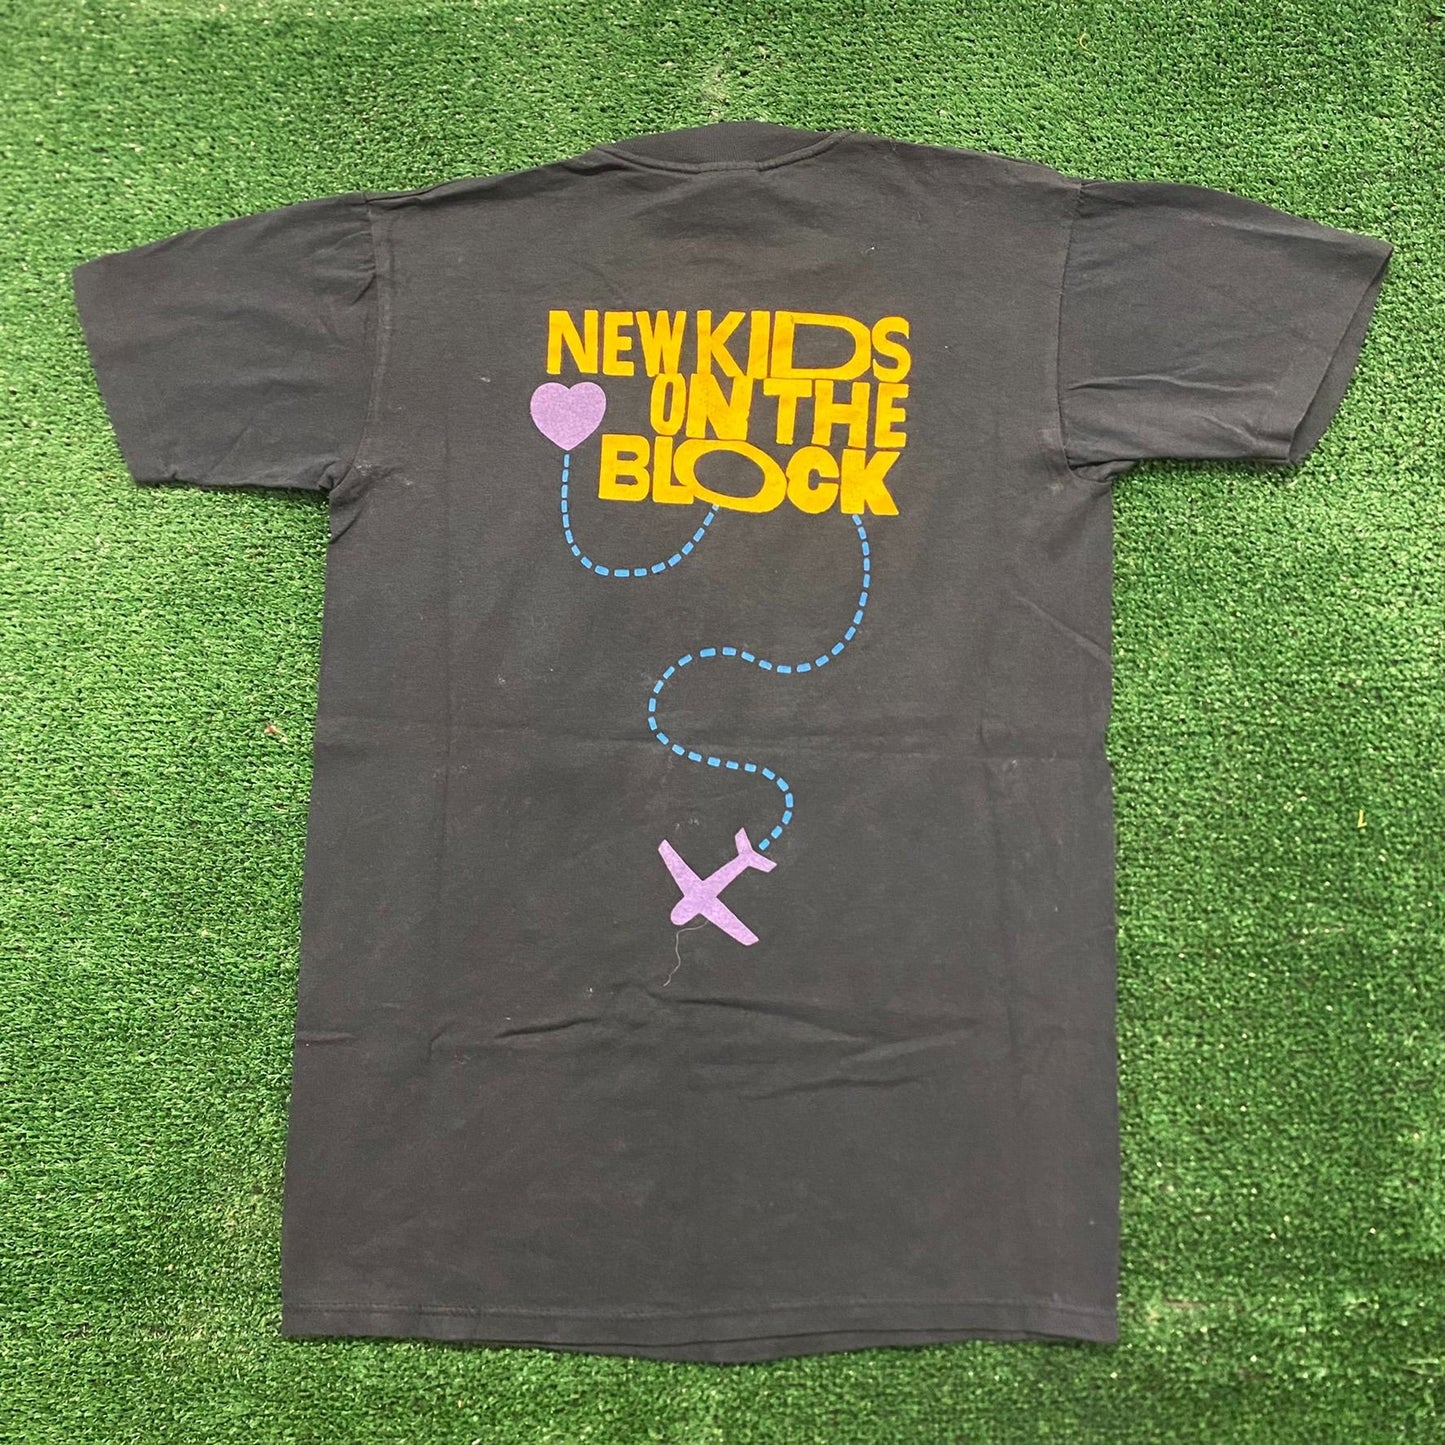 New Kids on the Block Vintage 90s Pop Music Band T-Shirt